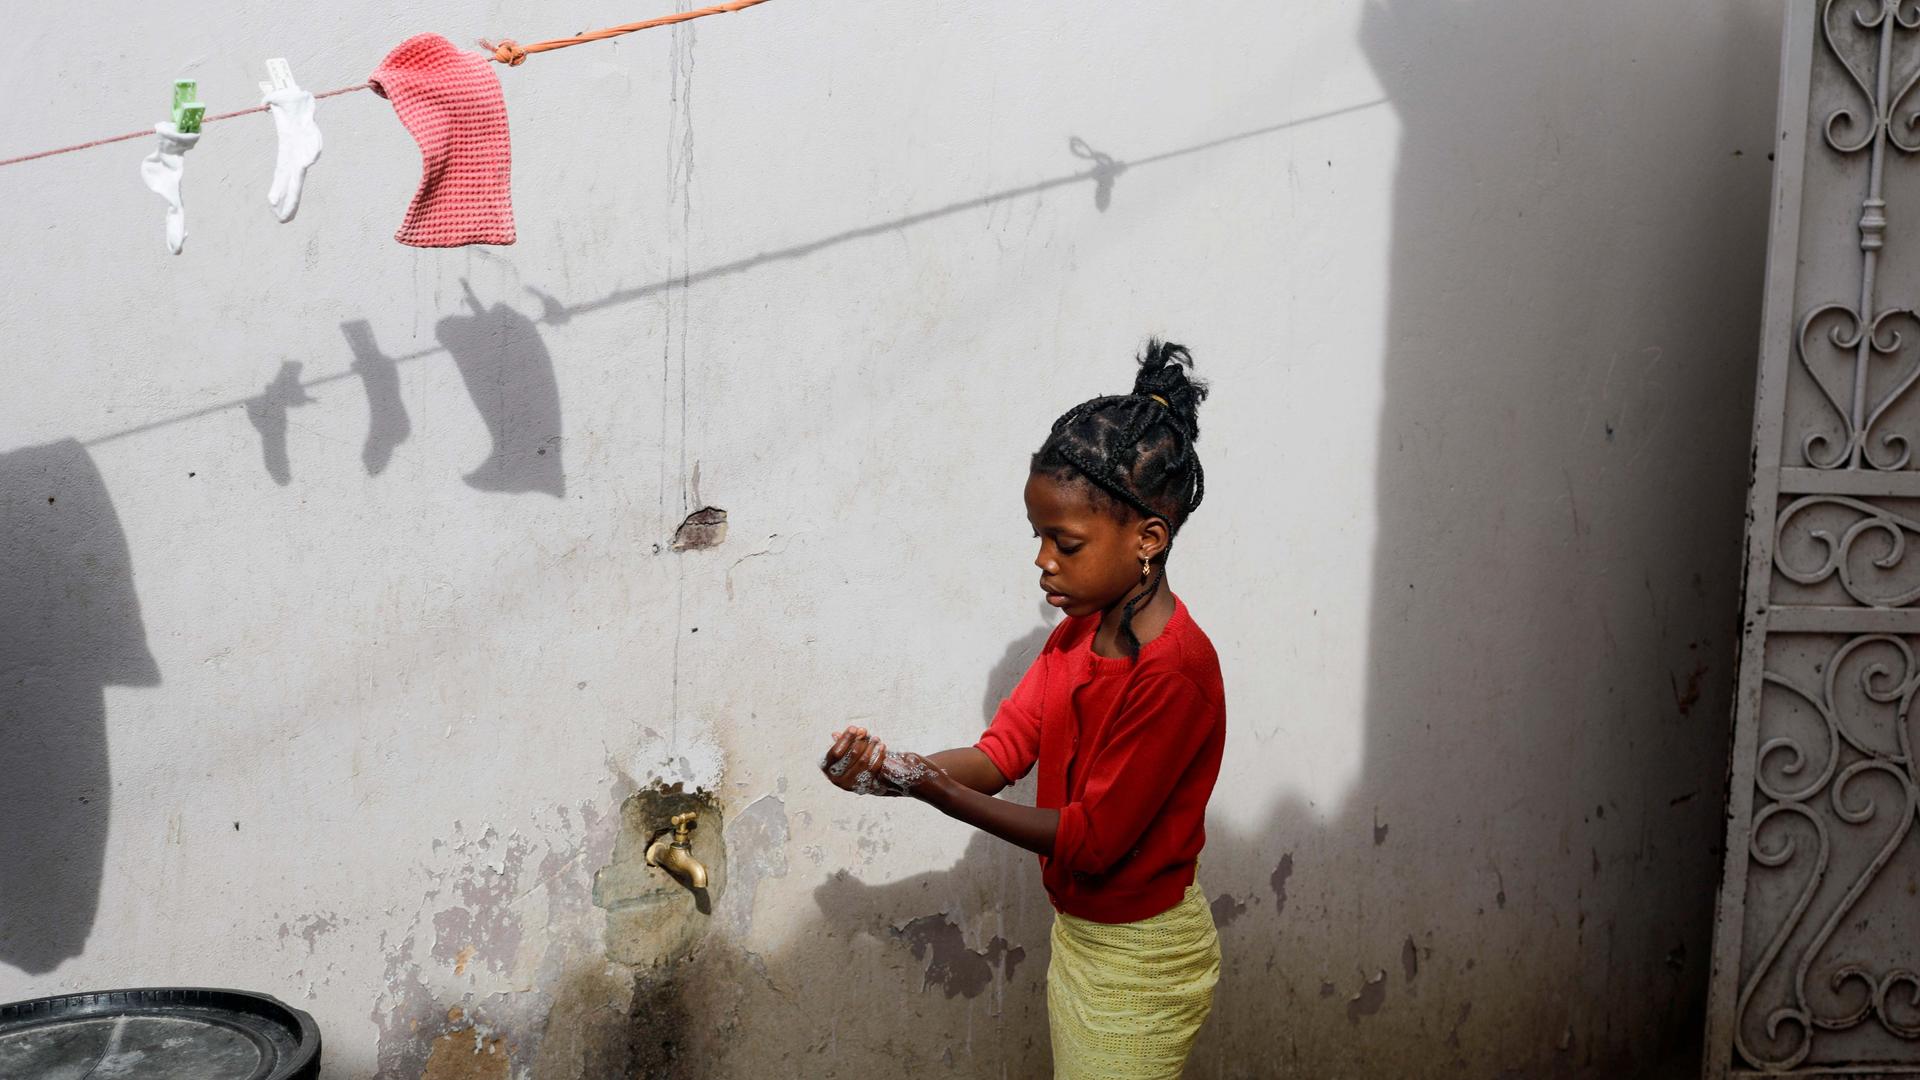 A girl washes her hands at a spigot at the entrance of her parents' house in Pikine, on the outskirts of Dakar, Senegal, on March 9, 2020.